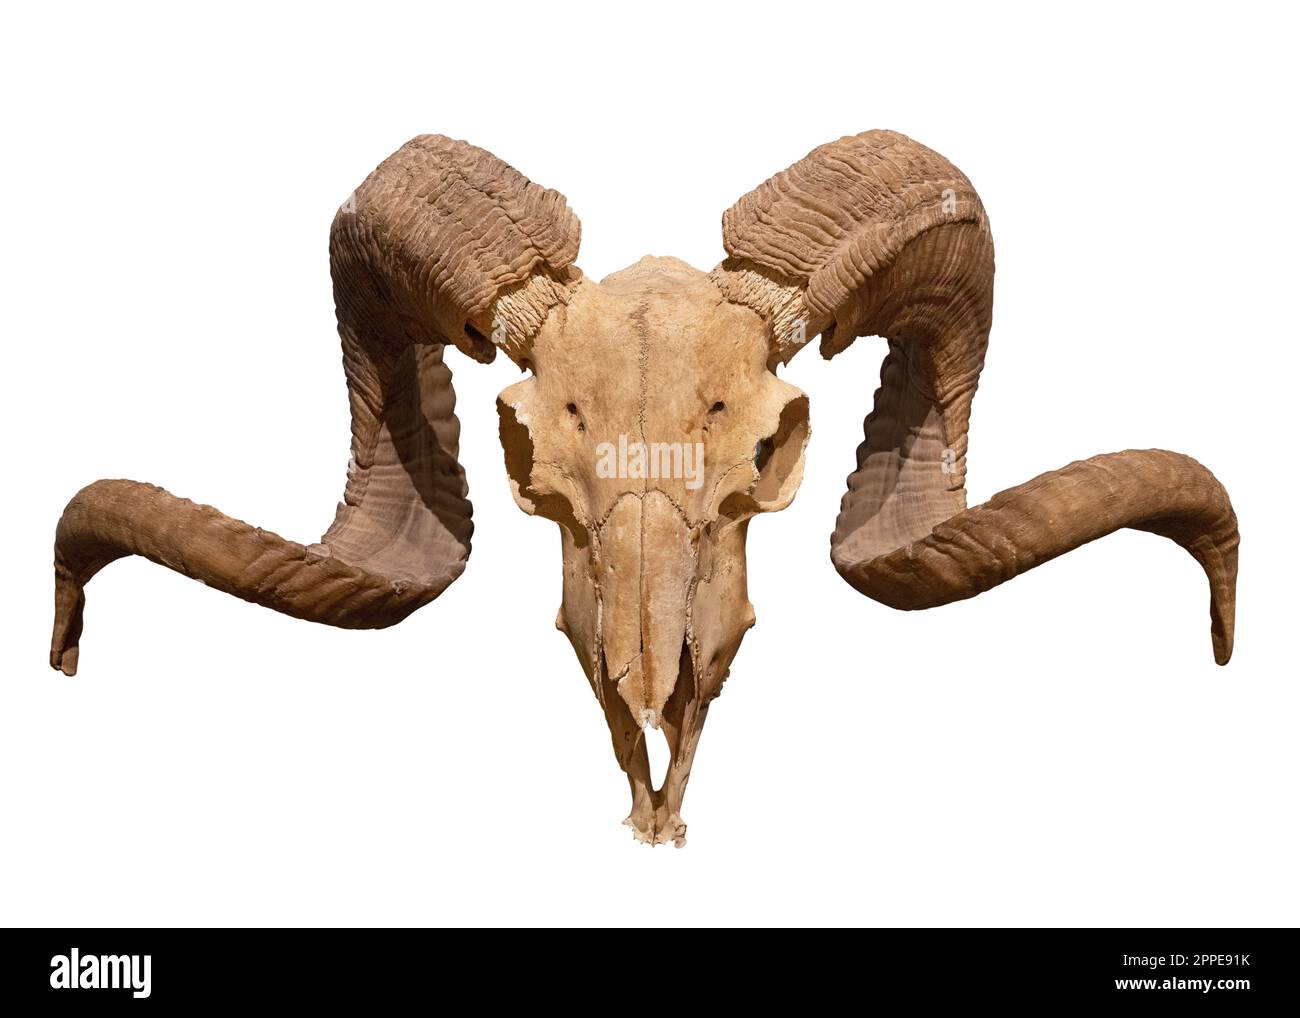 Ram skull with horns isolated on white background Stock Photo